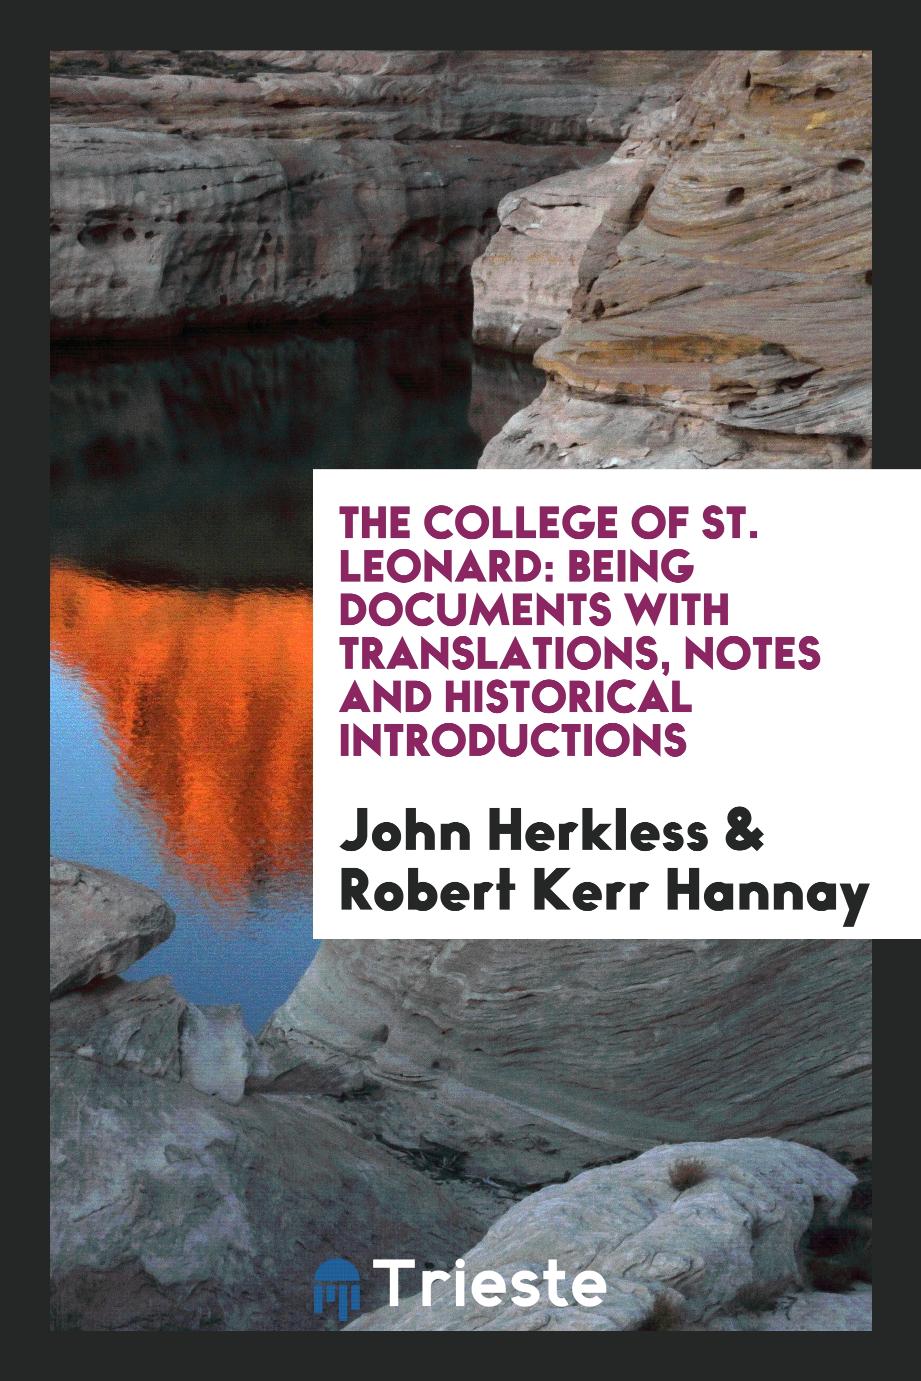 The College of St. Leonard: Being Documents with Translations, Notes and Historical Introductions